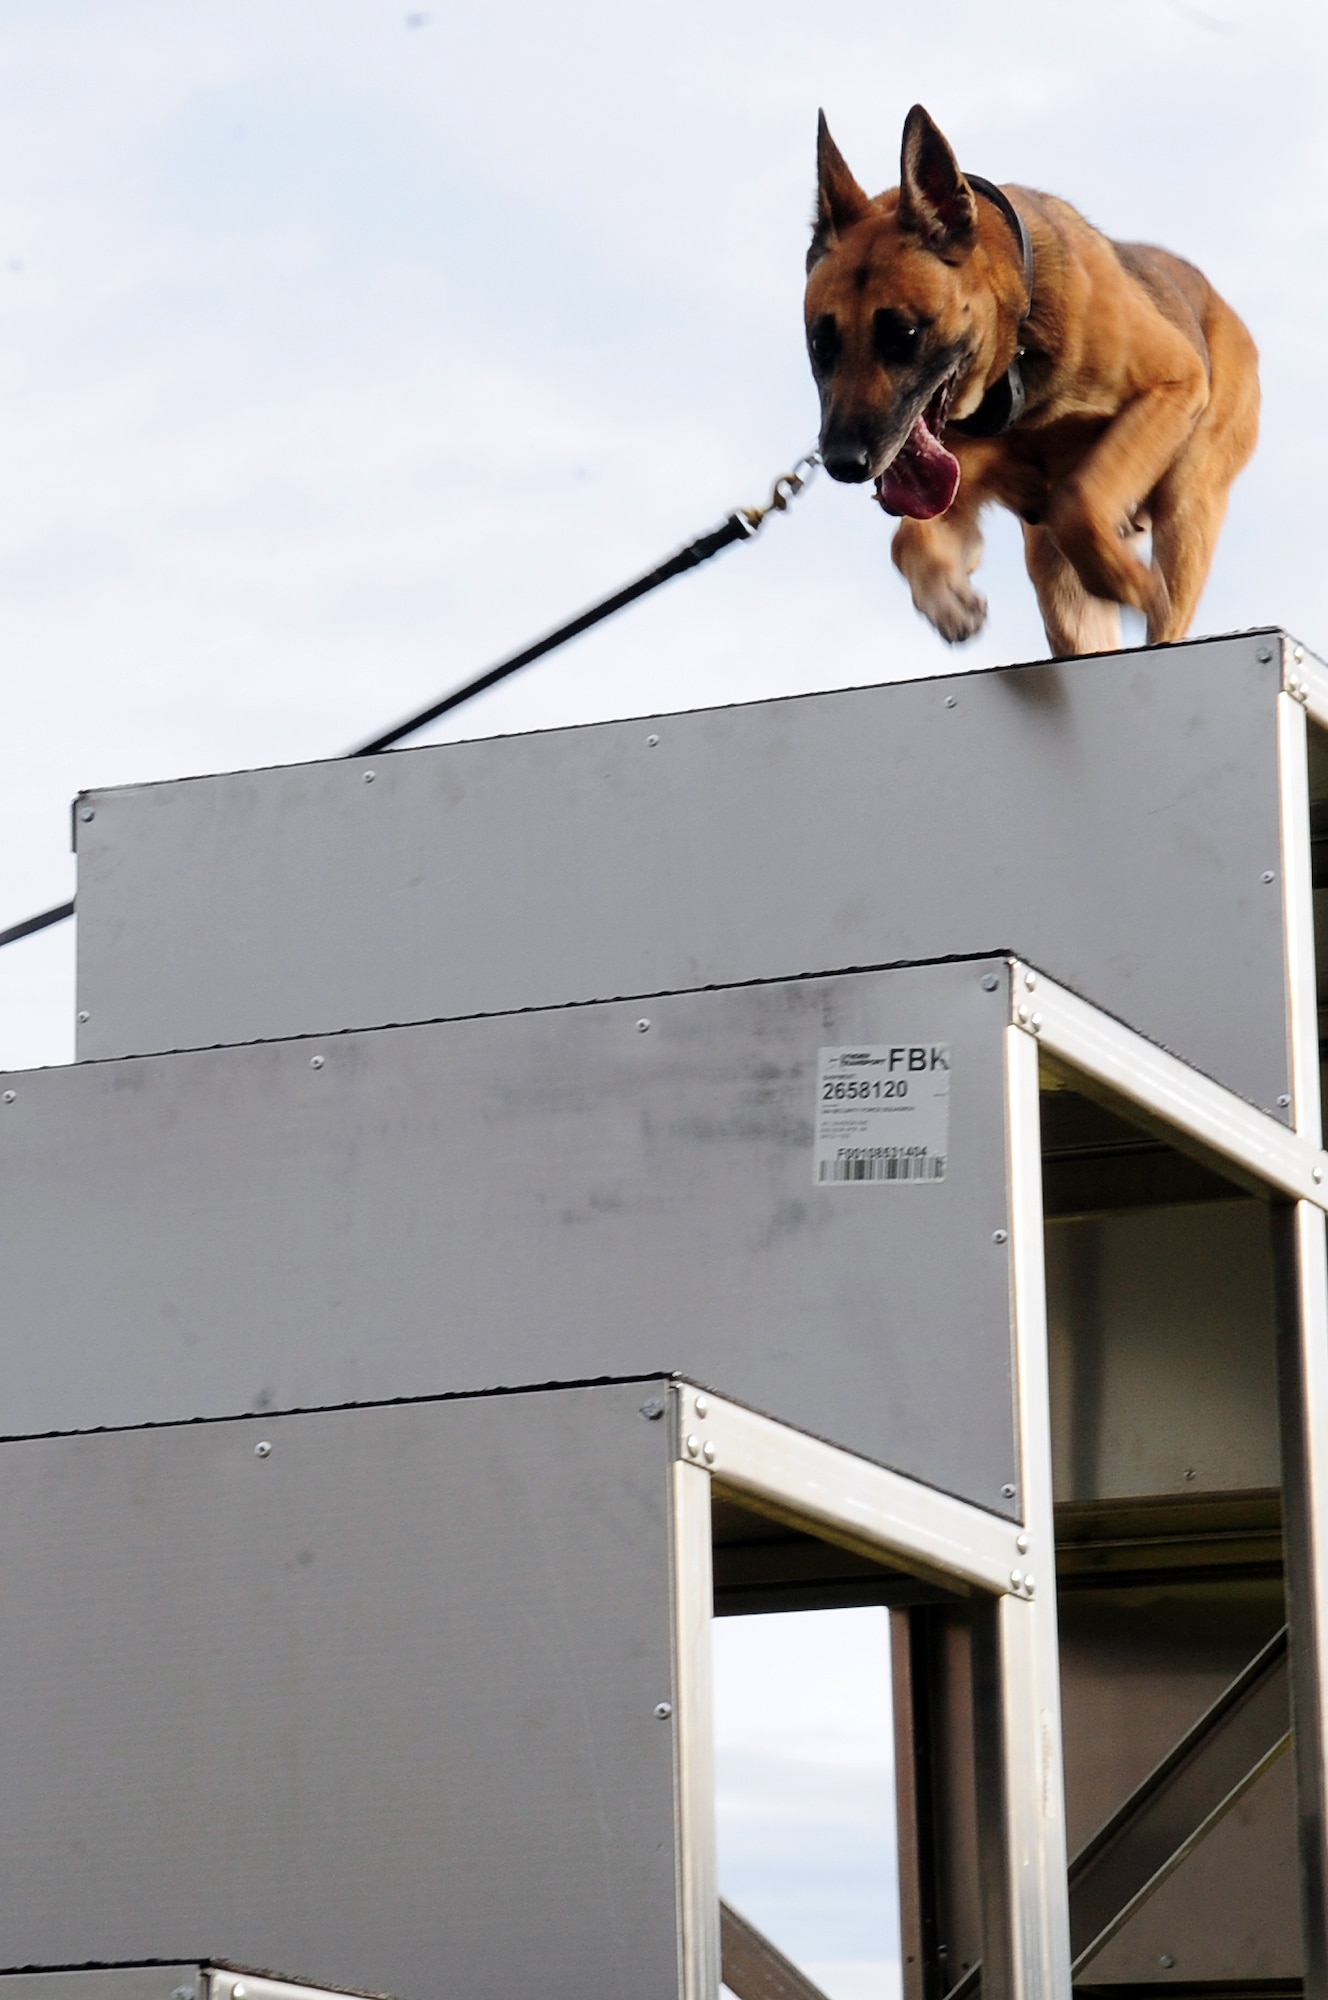 Azza, 354th Security Force Squadron military working dog, jumps down a pyramid as part of an obstacle course run Oct. 4, 2012, Eielson Air Force Base, Alaska. Azza, an 8-year-old Belgian Malinois, recently returned from a deployment to Afghanistan. (U.S. Air Force photo/Airman 1st Class Zachary Perras)